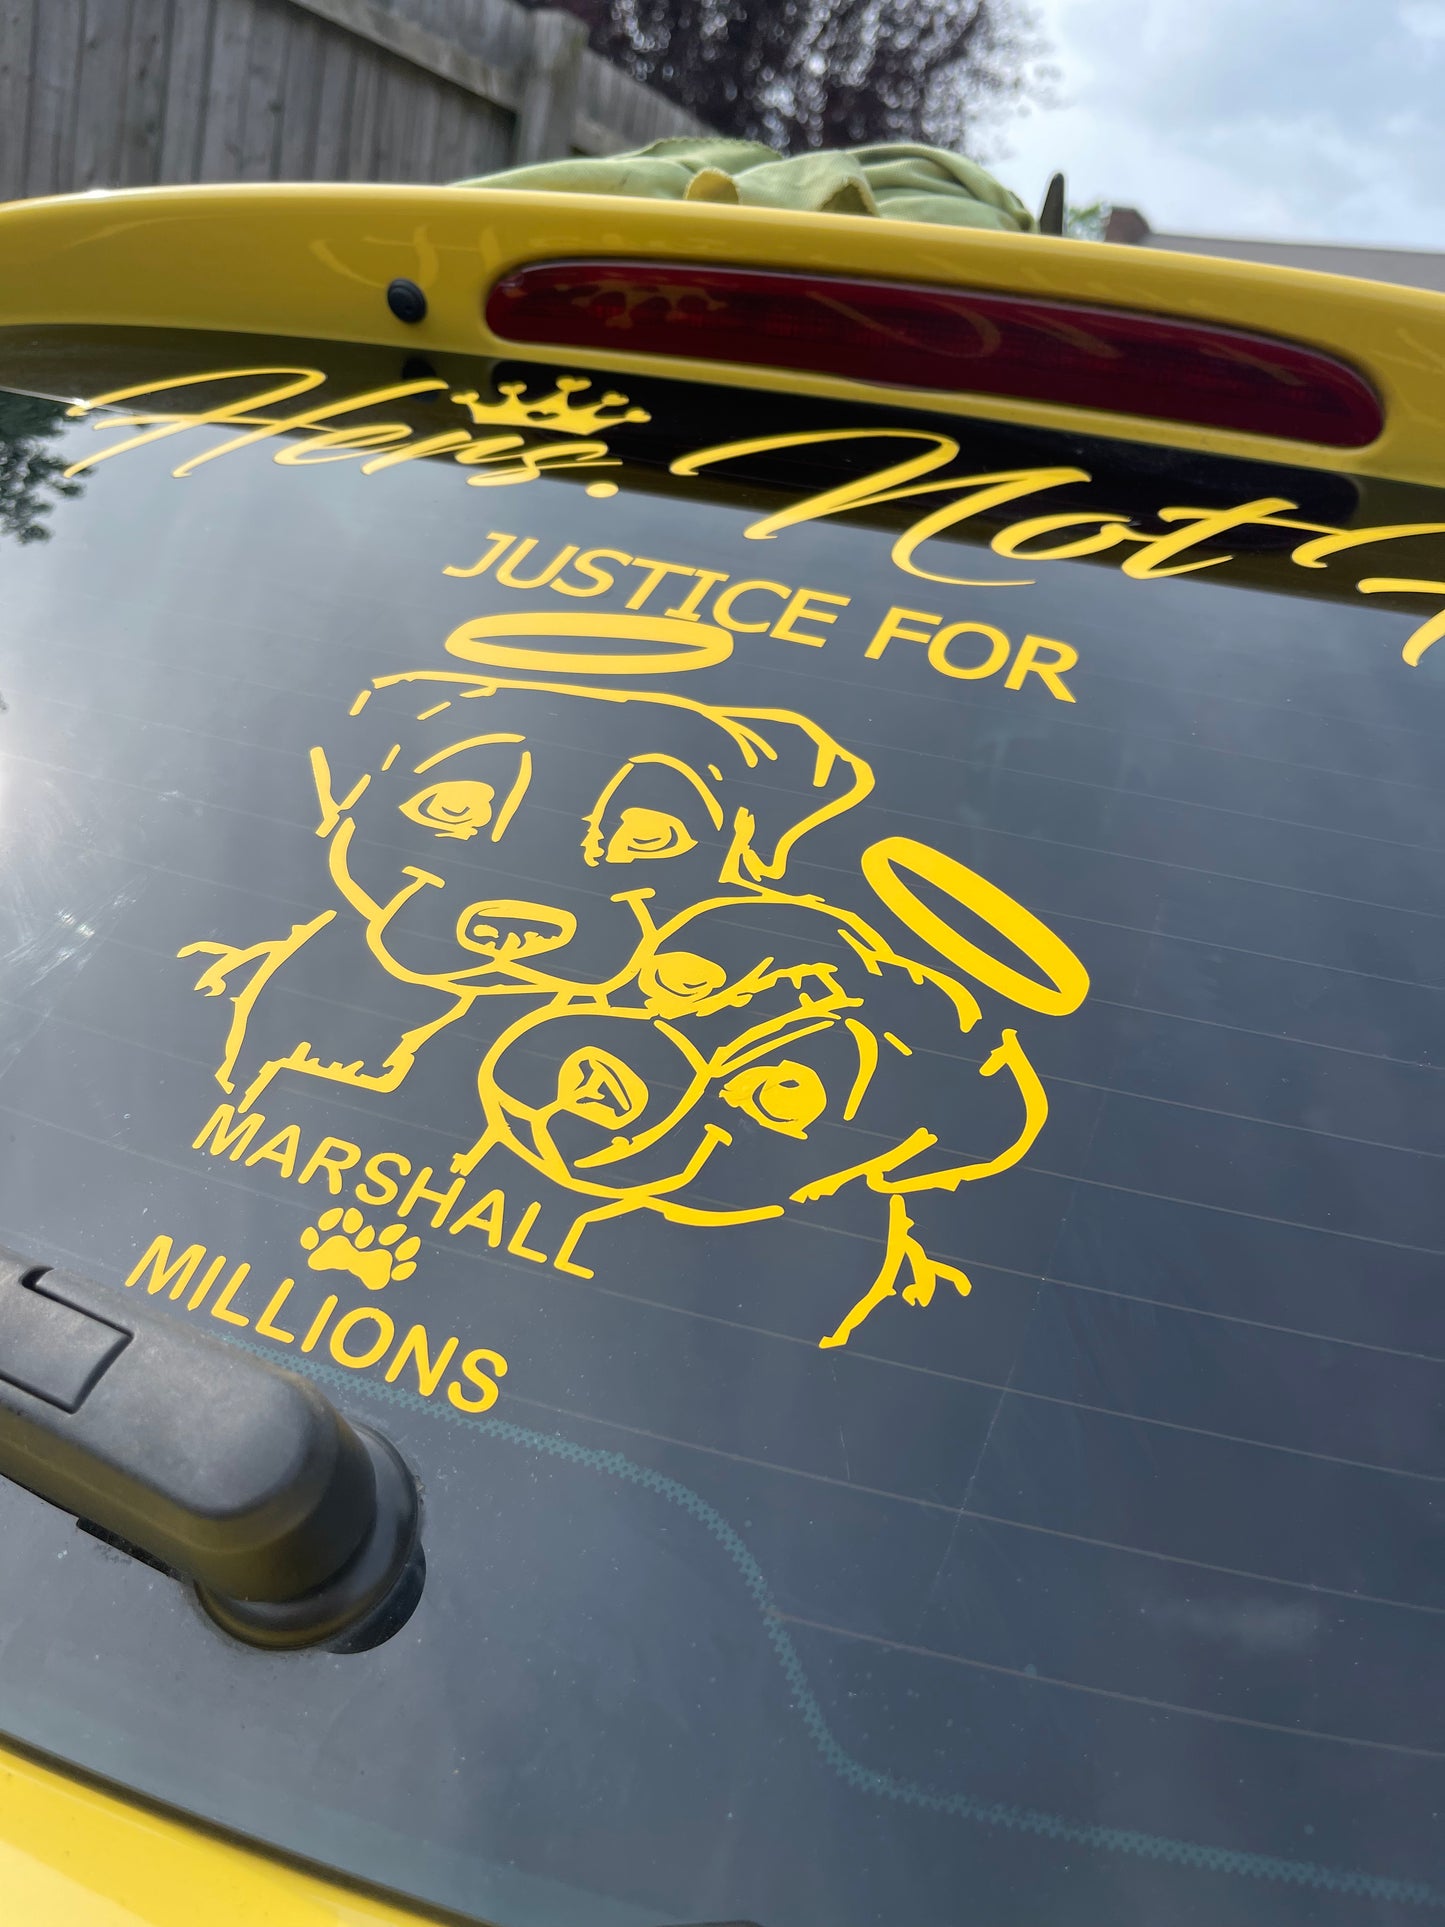 Justice For Marshall & Millions Sticker